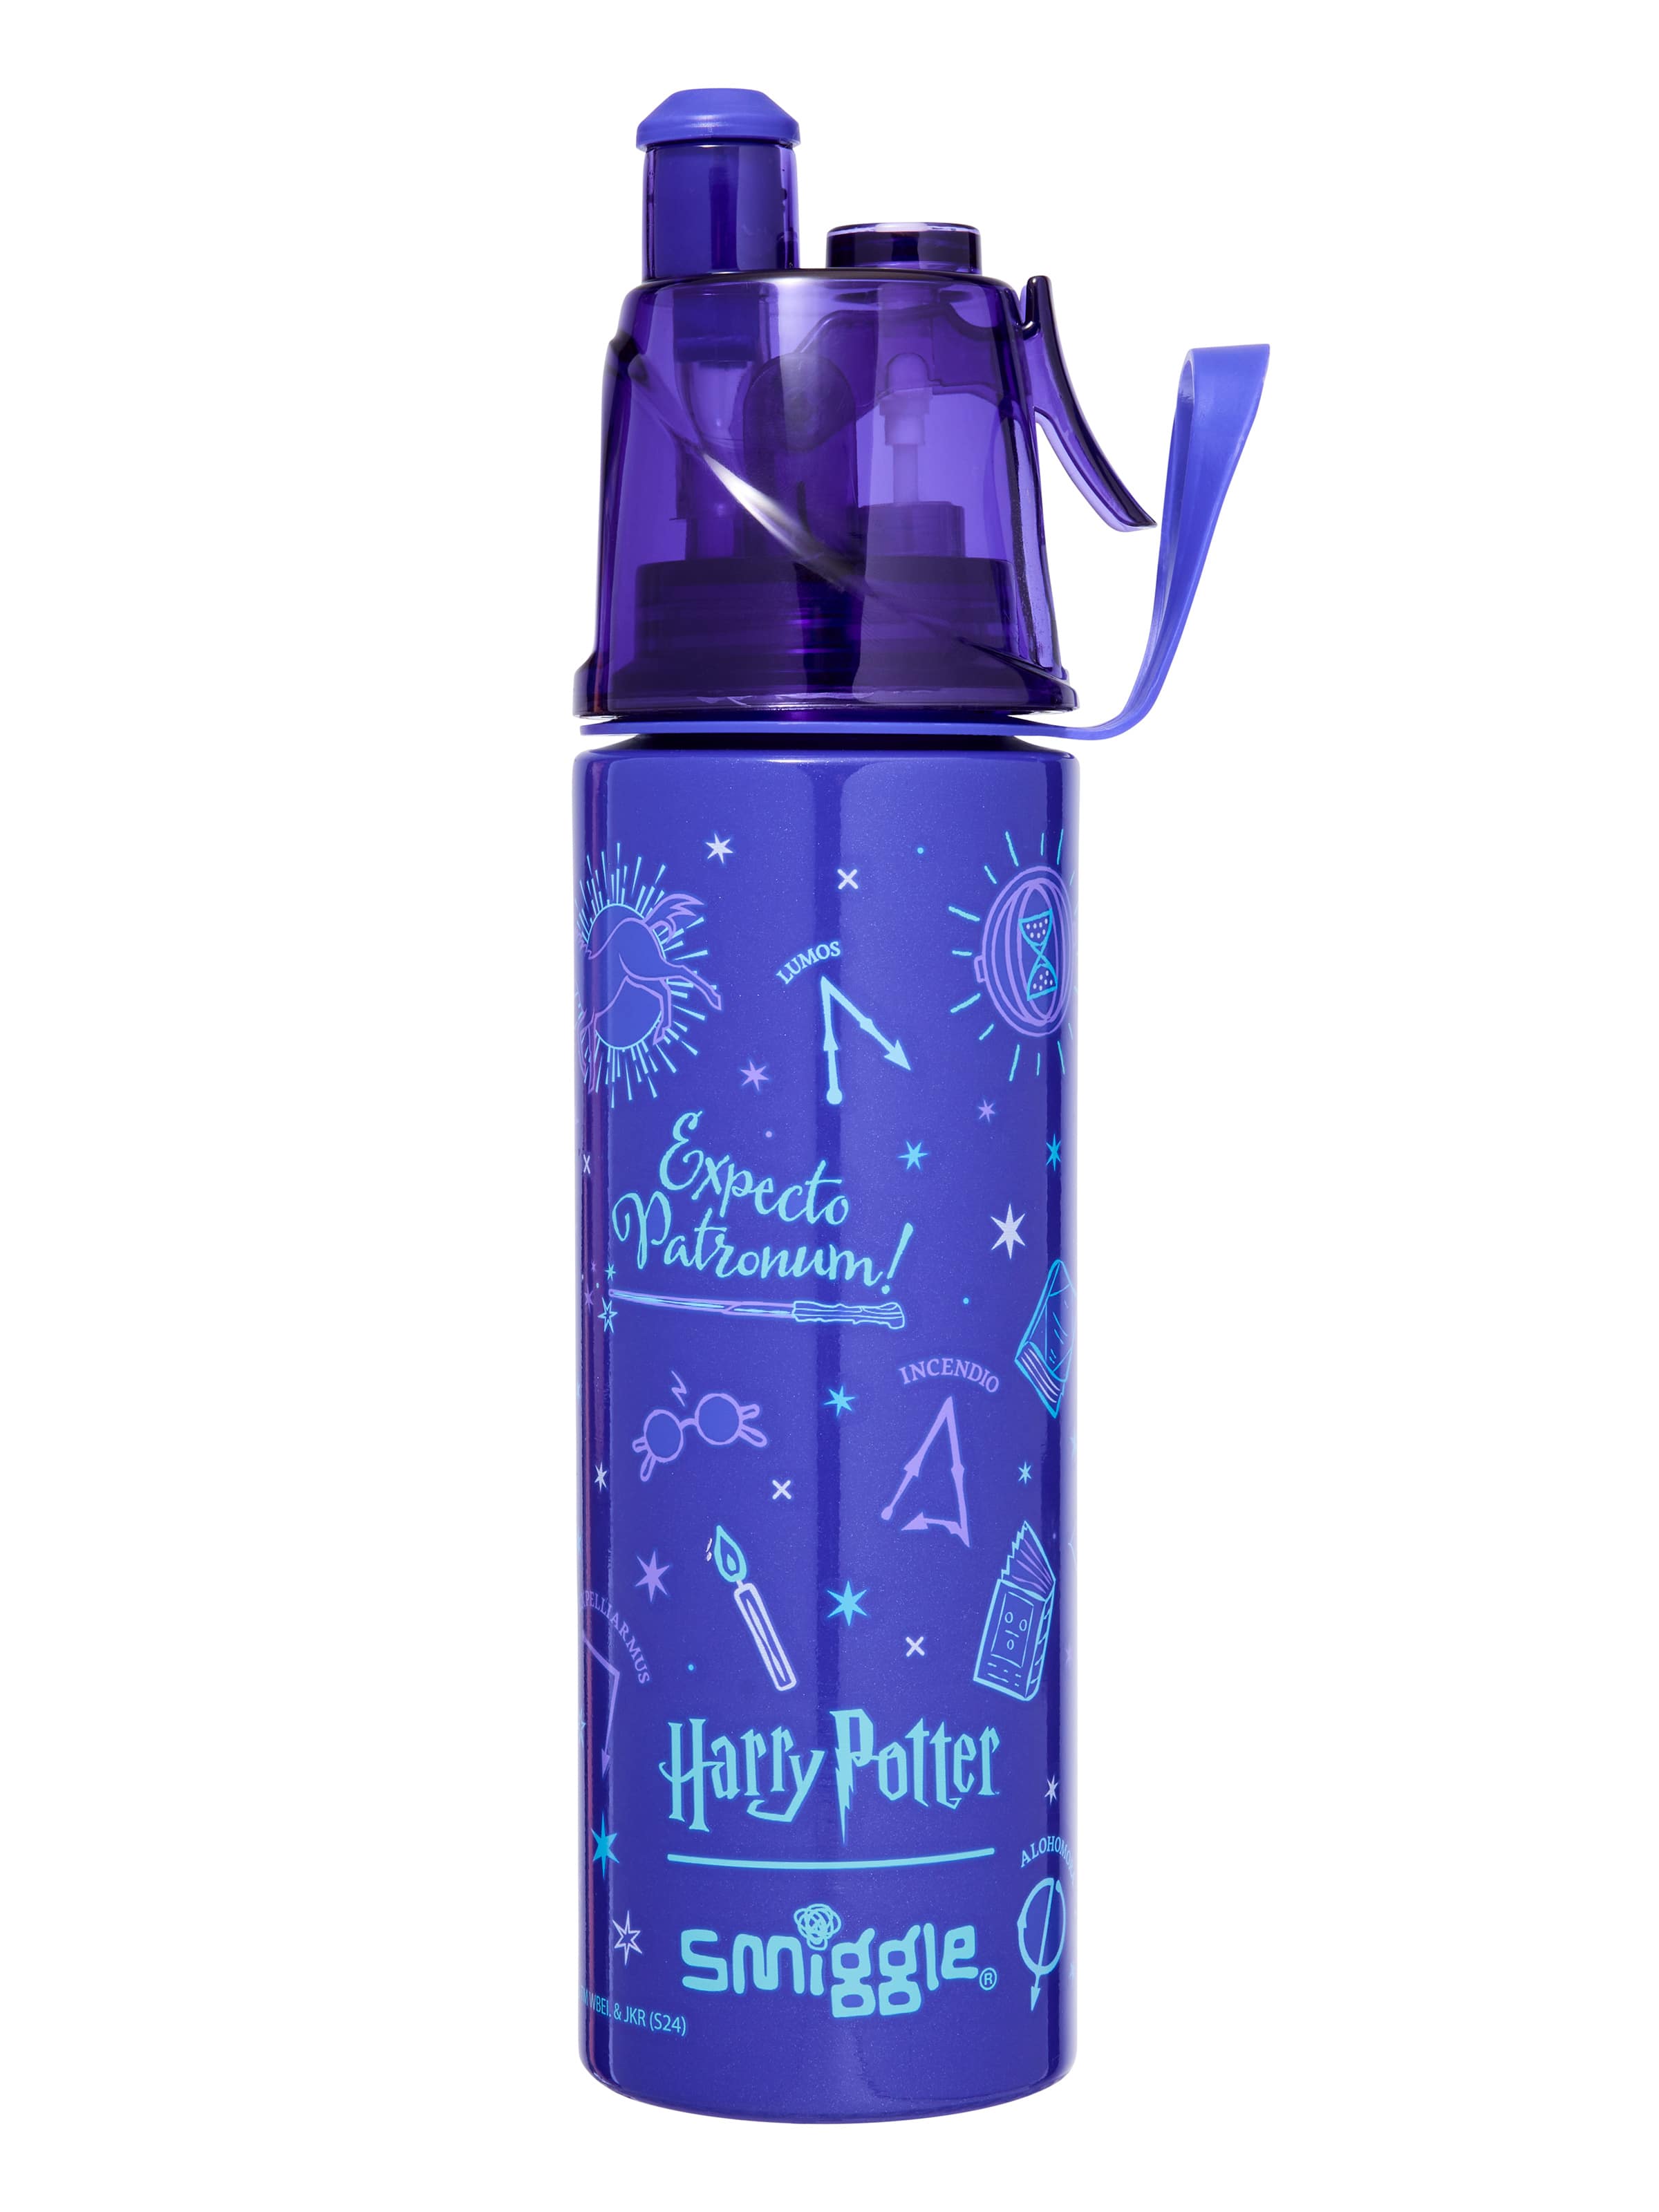 Harry Potter Spritz Insulated Stainless Steel Drink Bottle 500Ml